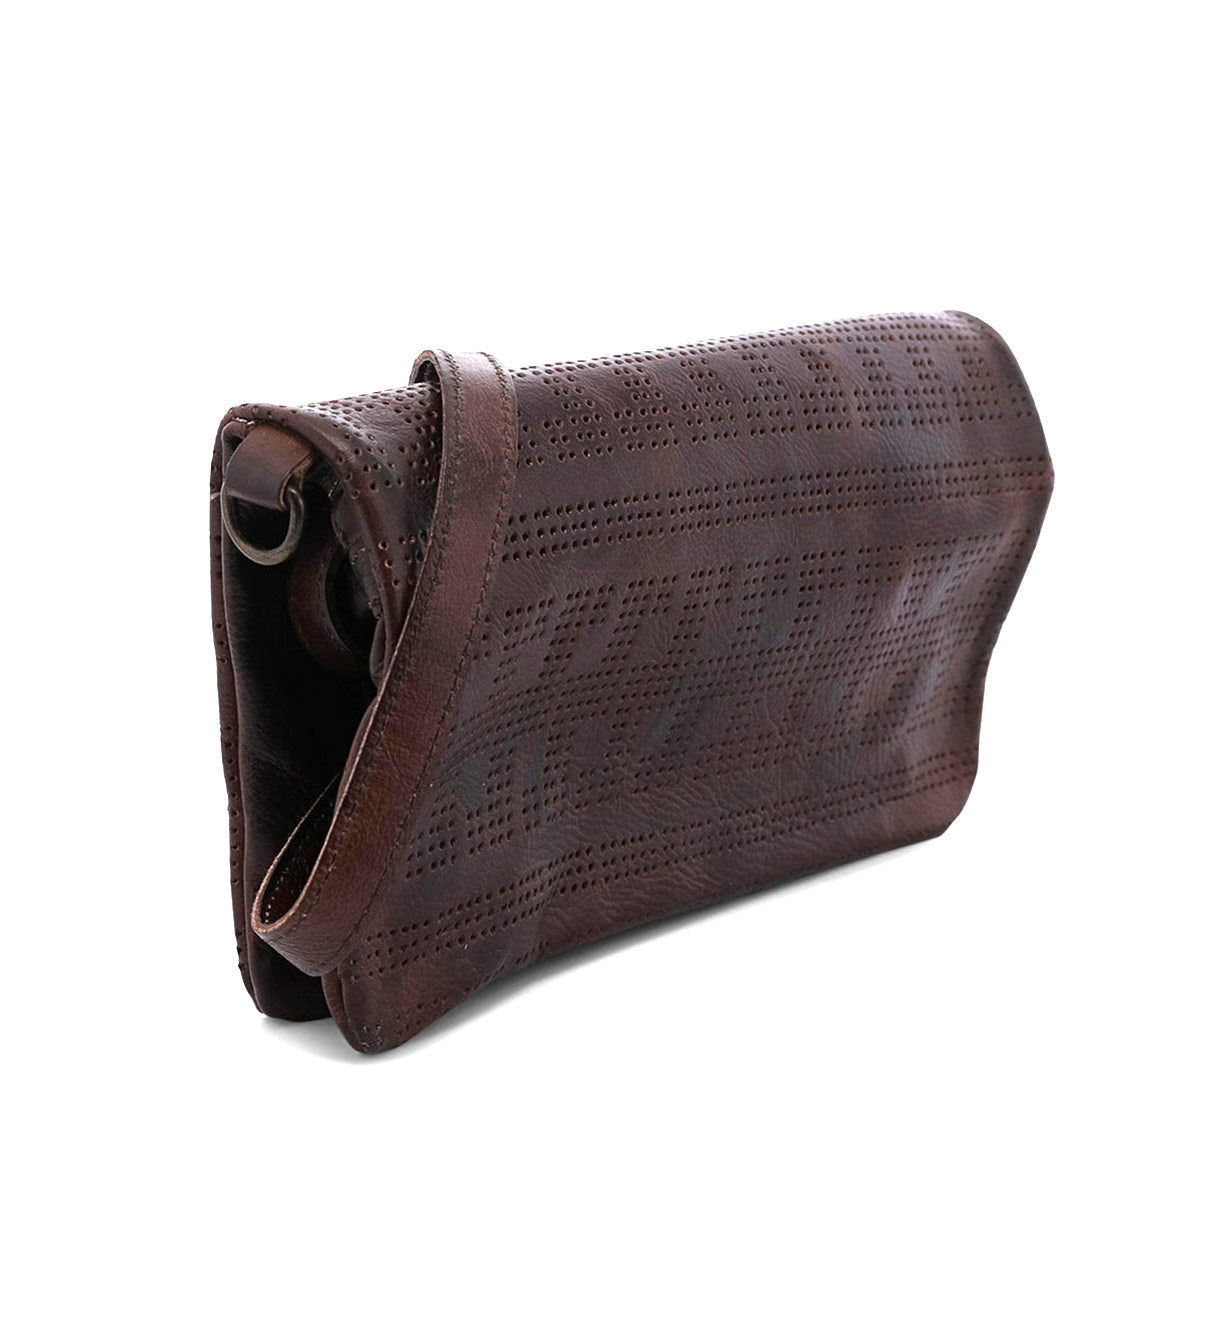 An image of a Bed Stu Bayshore brown leather cross body bag.